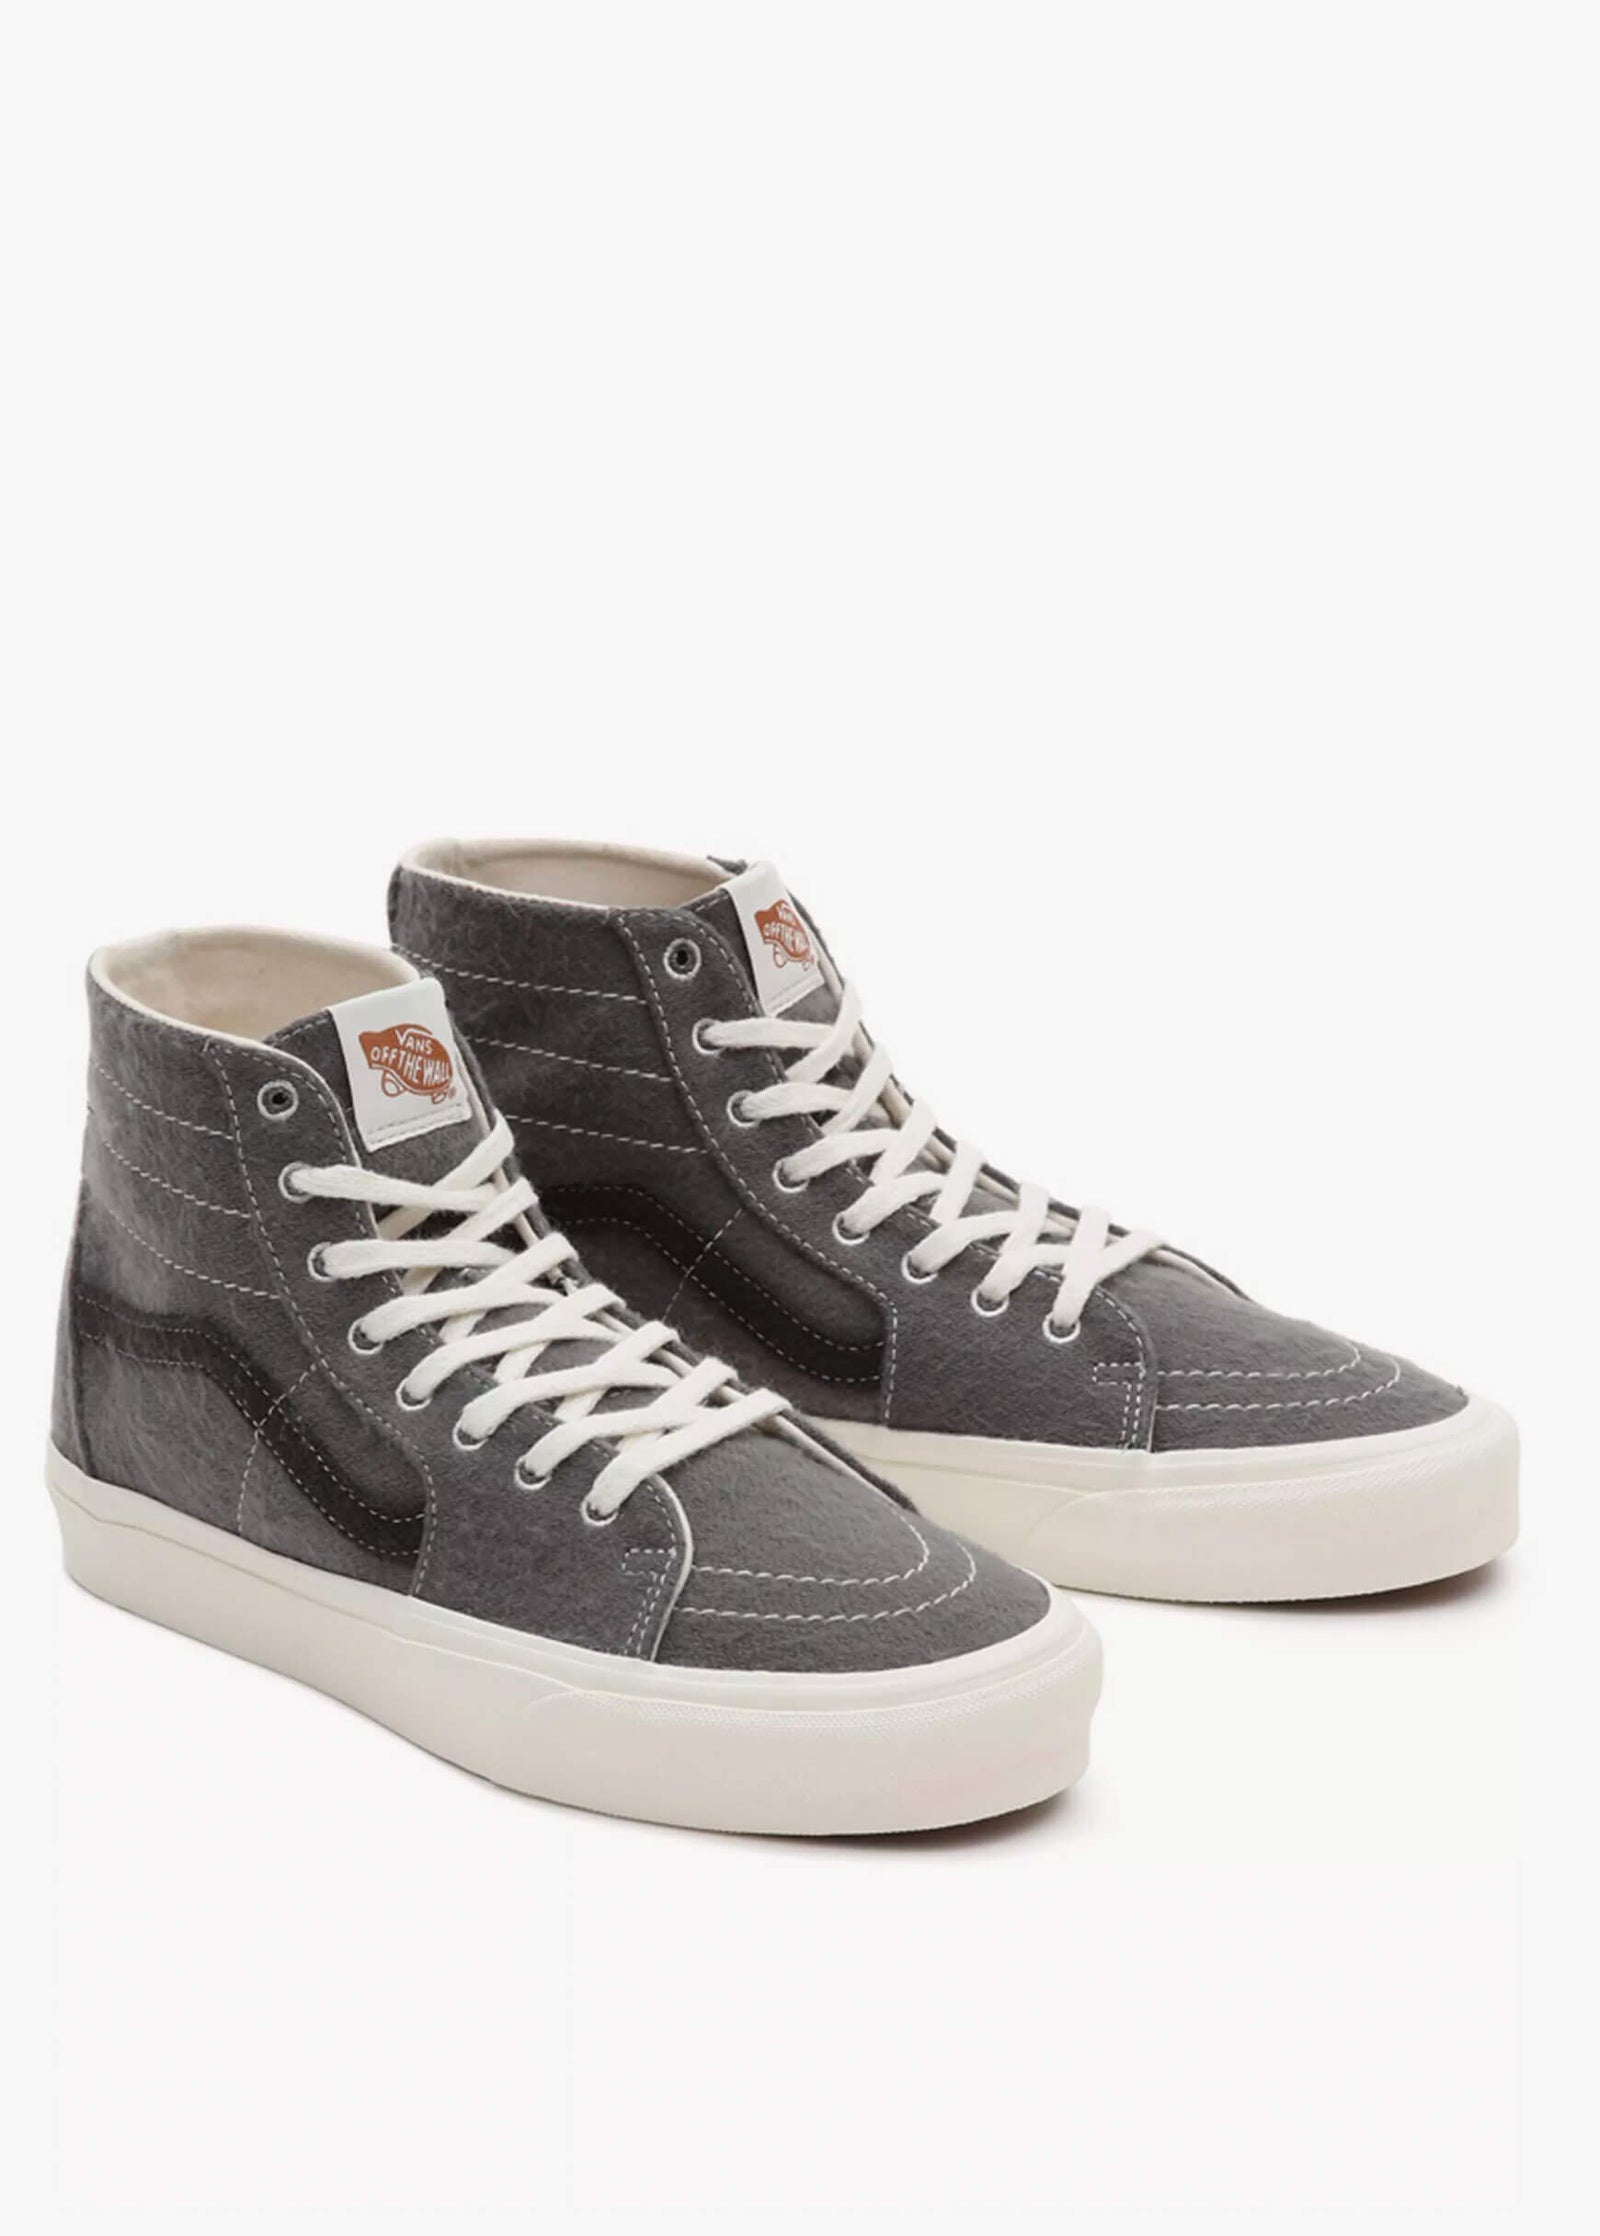 SK8-Hi Tapered Eco Theory Wool Light